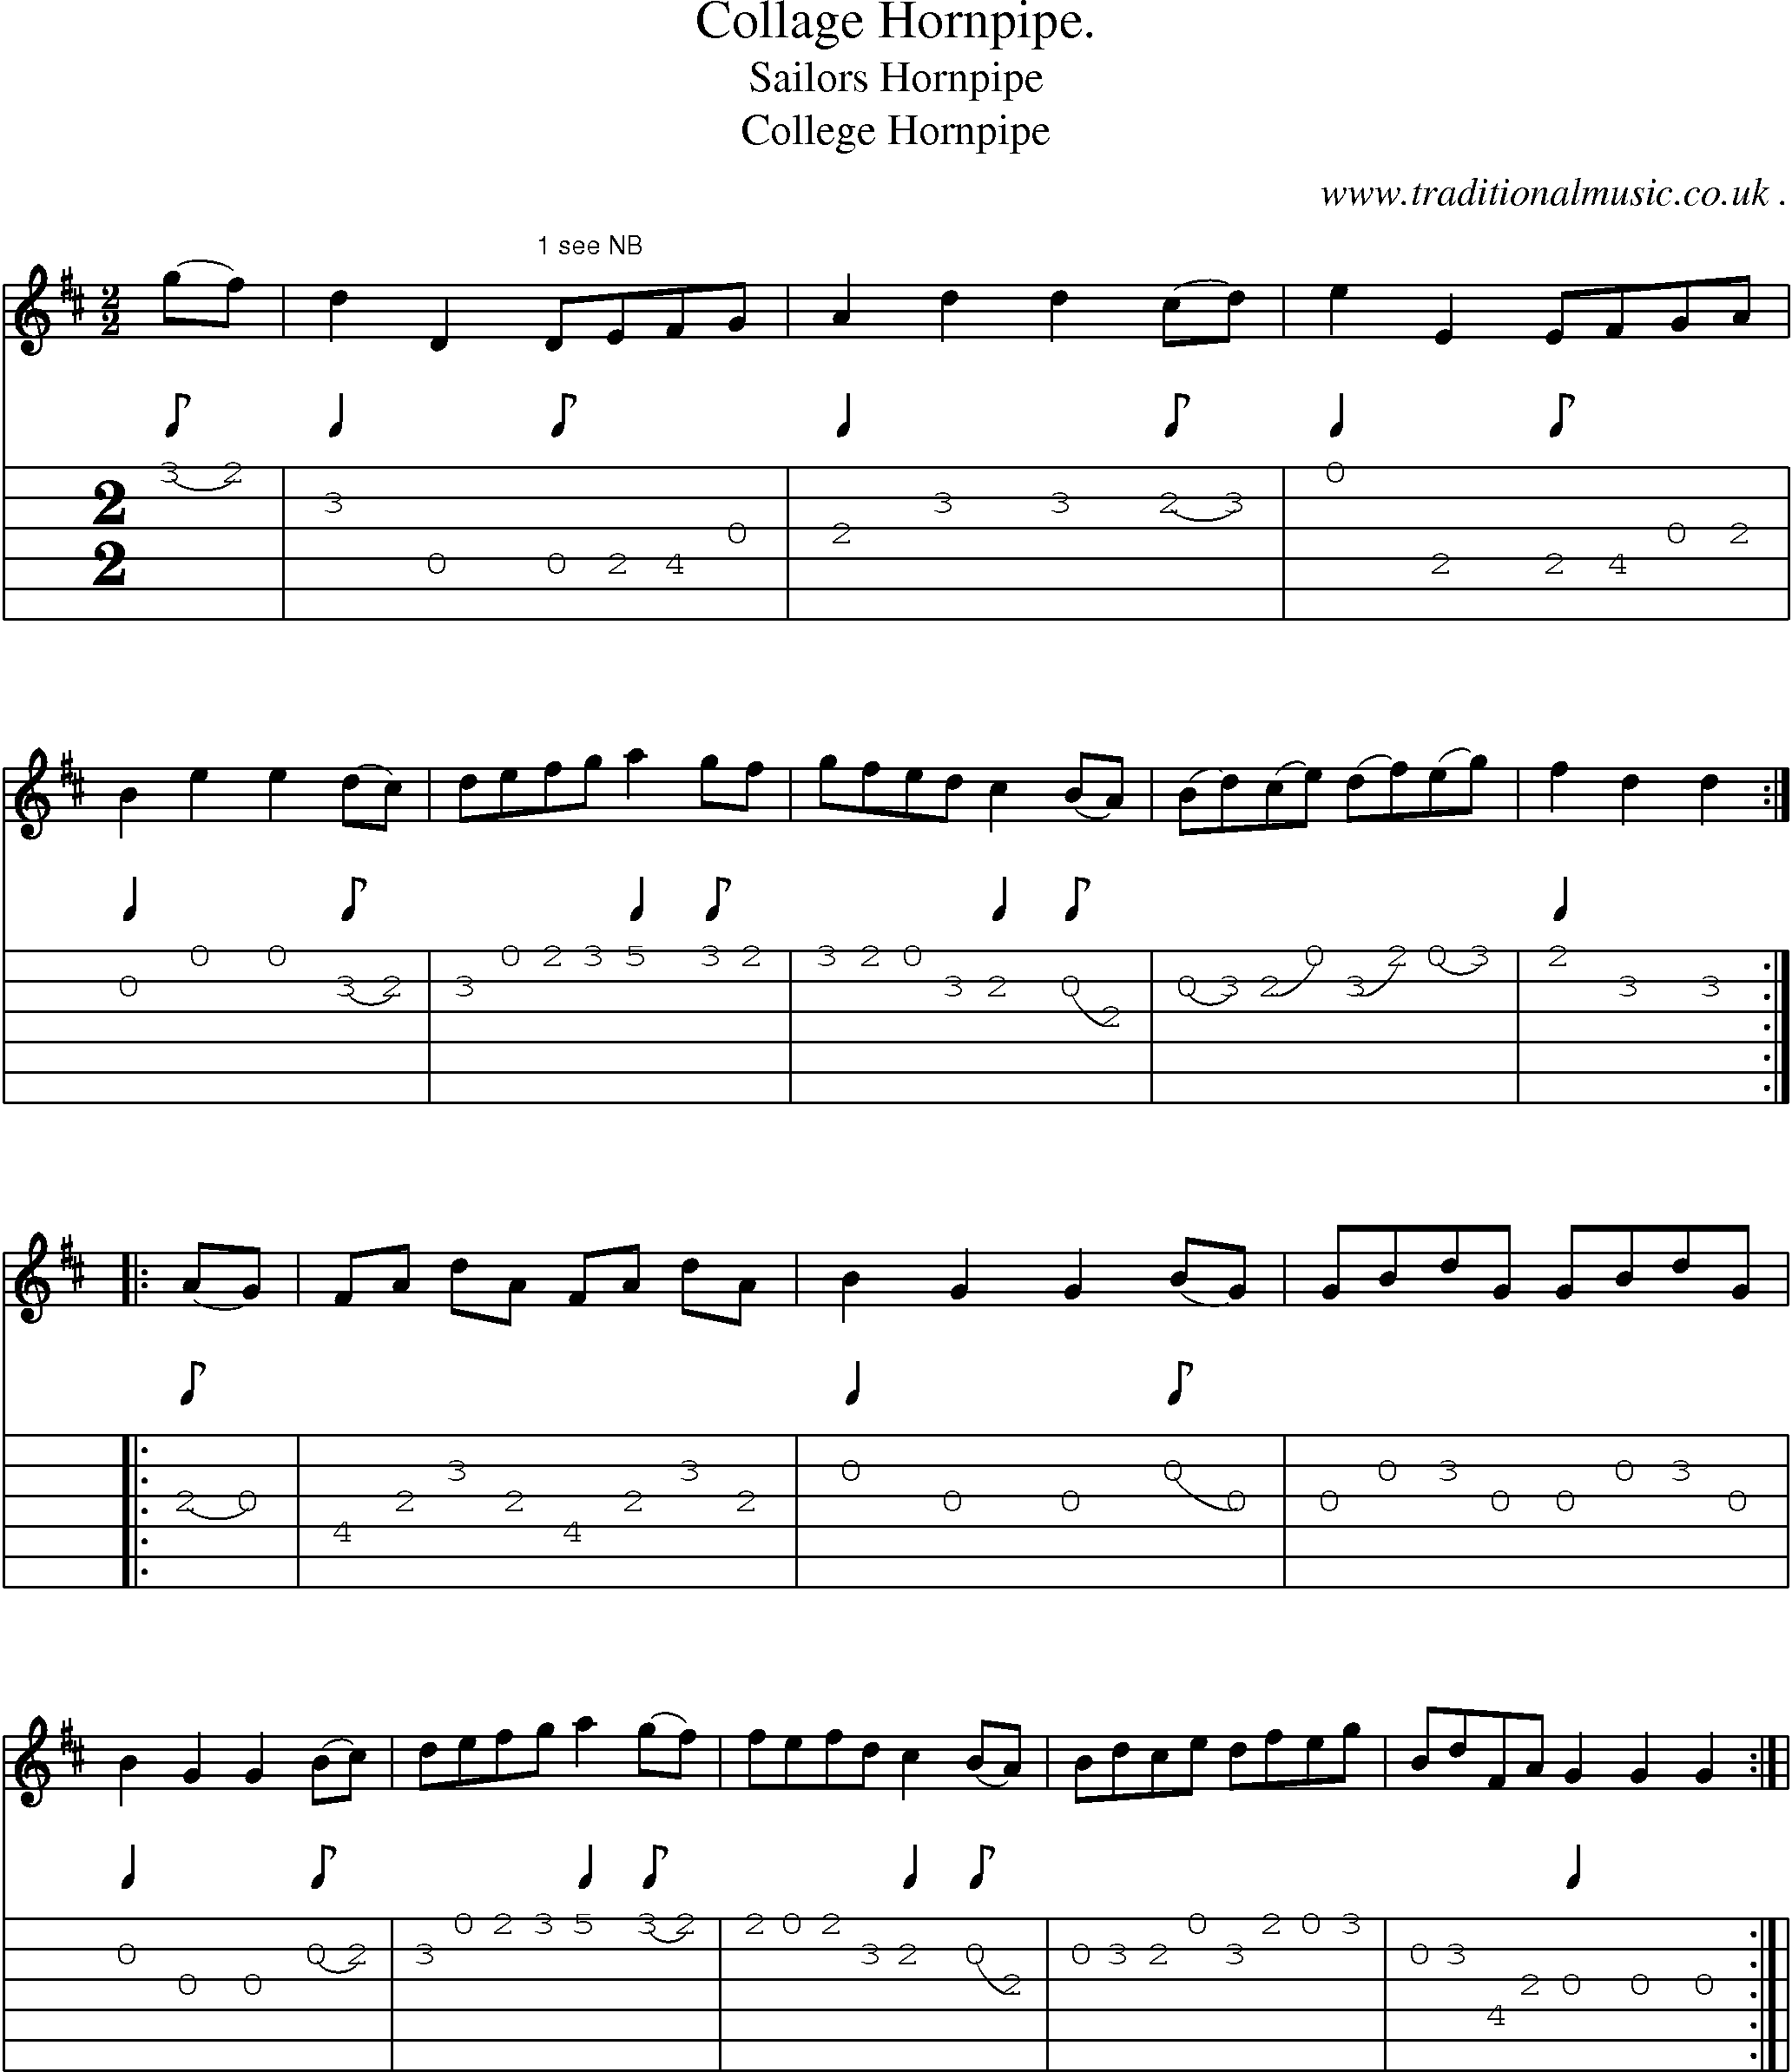 Sheet-Music and Guitar Tabs for Collage Hornpipe